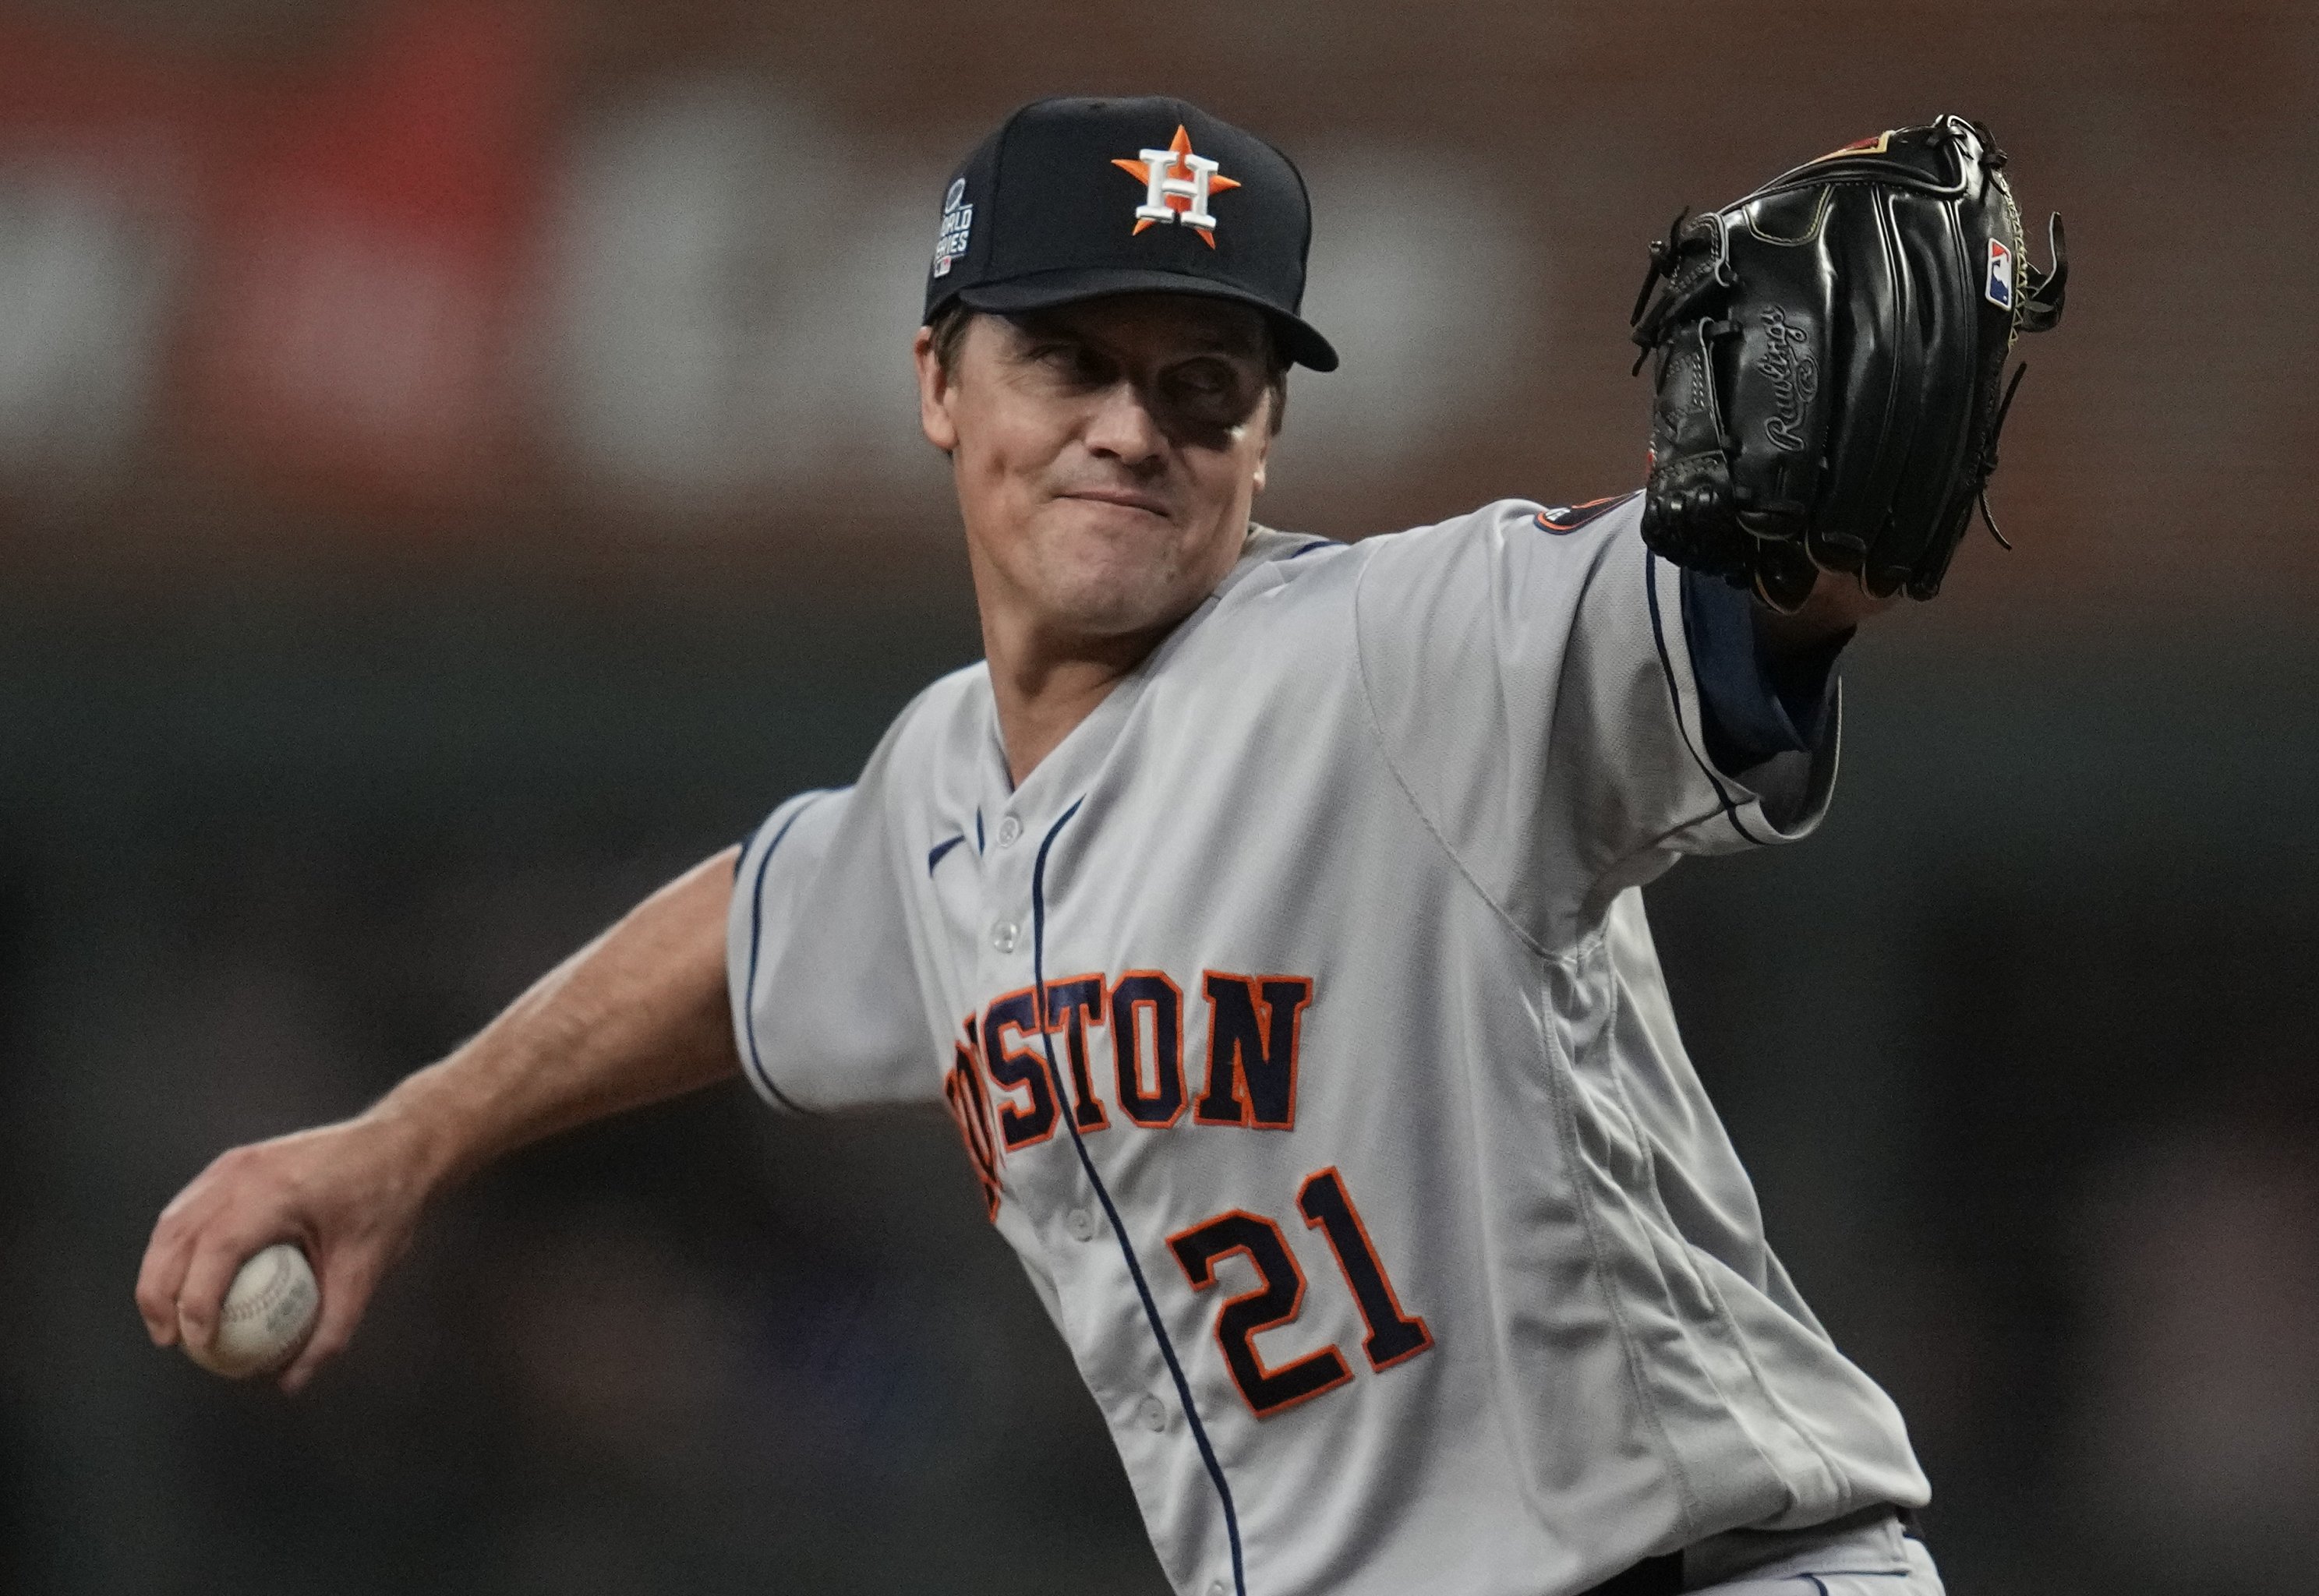 Zack Greinke hilariously not recognized at Astros MLB playoff game